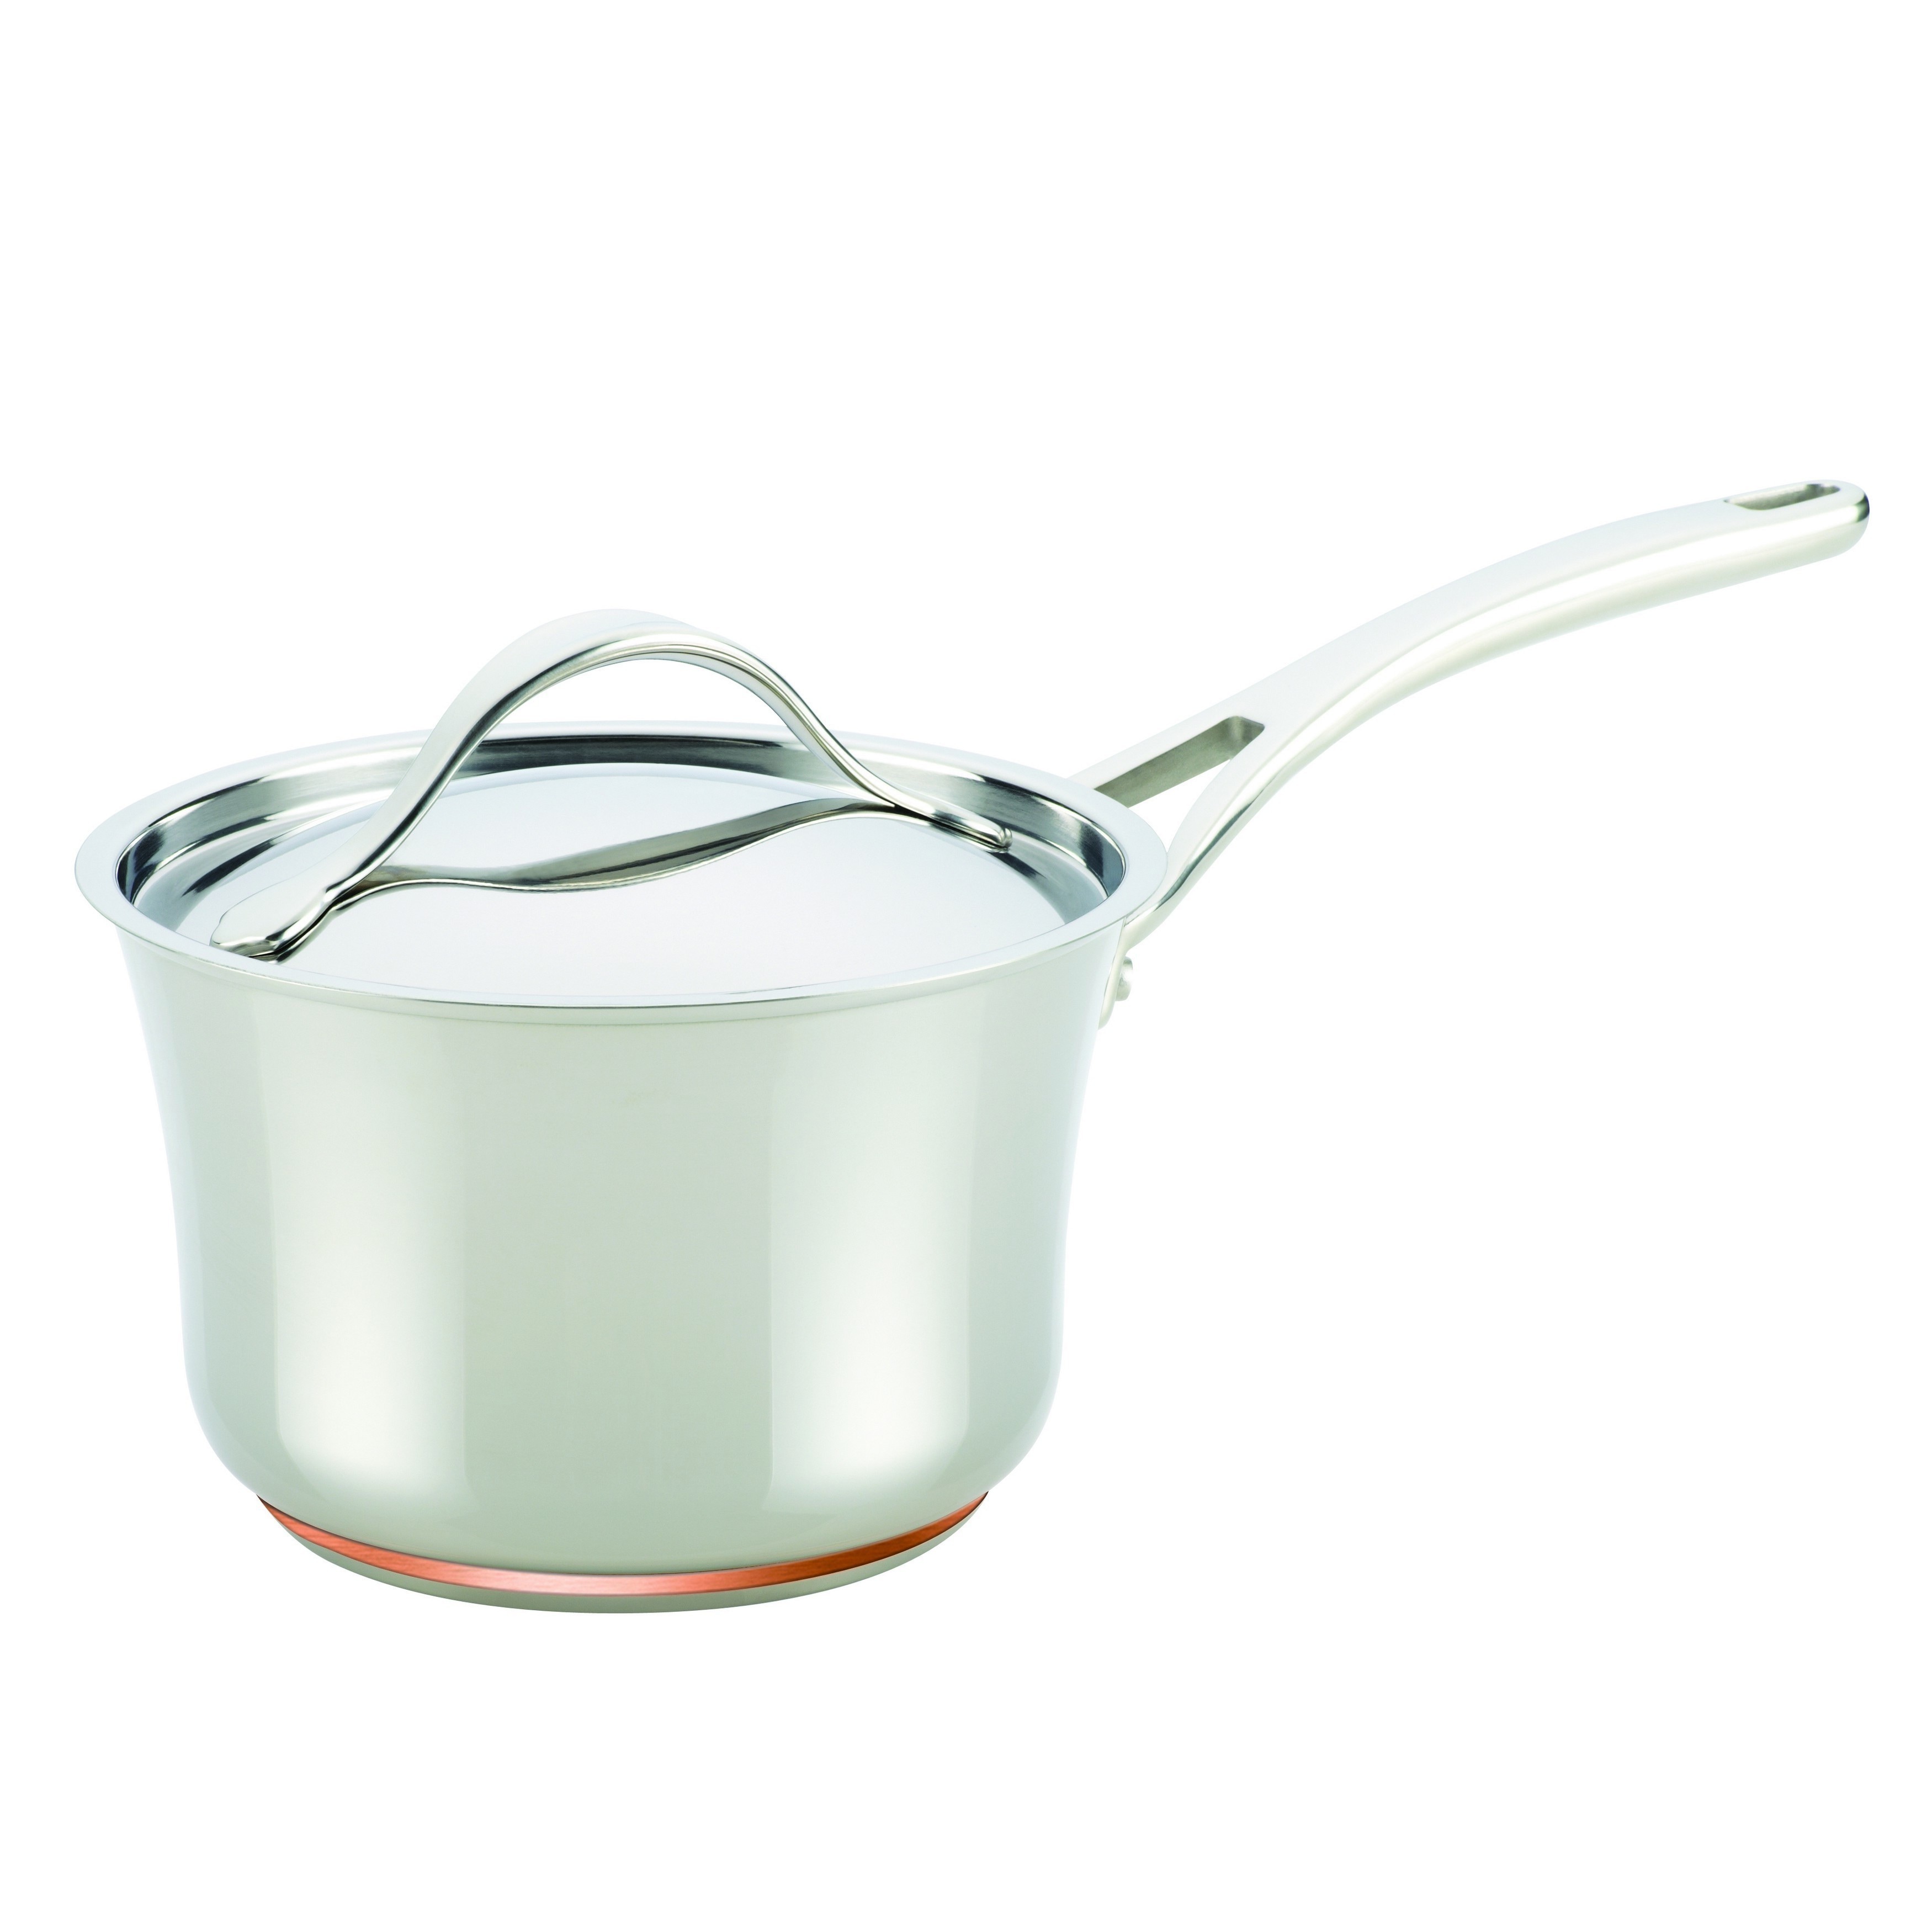 https://ak1.ostkcdn.com/images/products/9206701/Anolon-Nouvelle-Copper-Stainless-Steel-3.5-quart-Covered-Saucepan-5feae1f1-11d1-4264-a737-f8be1d611898.jpg